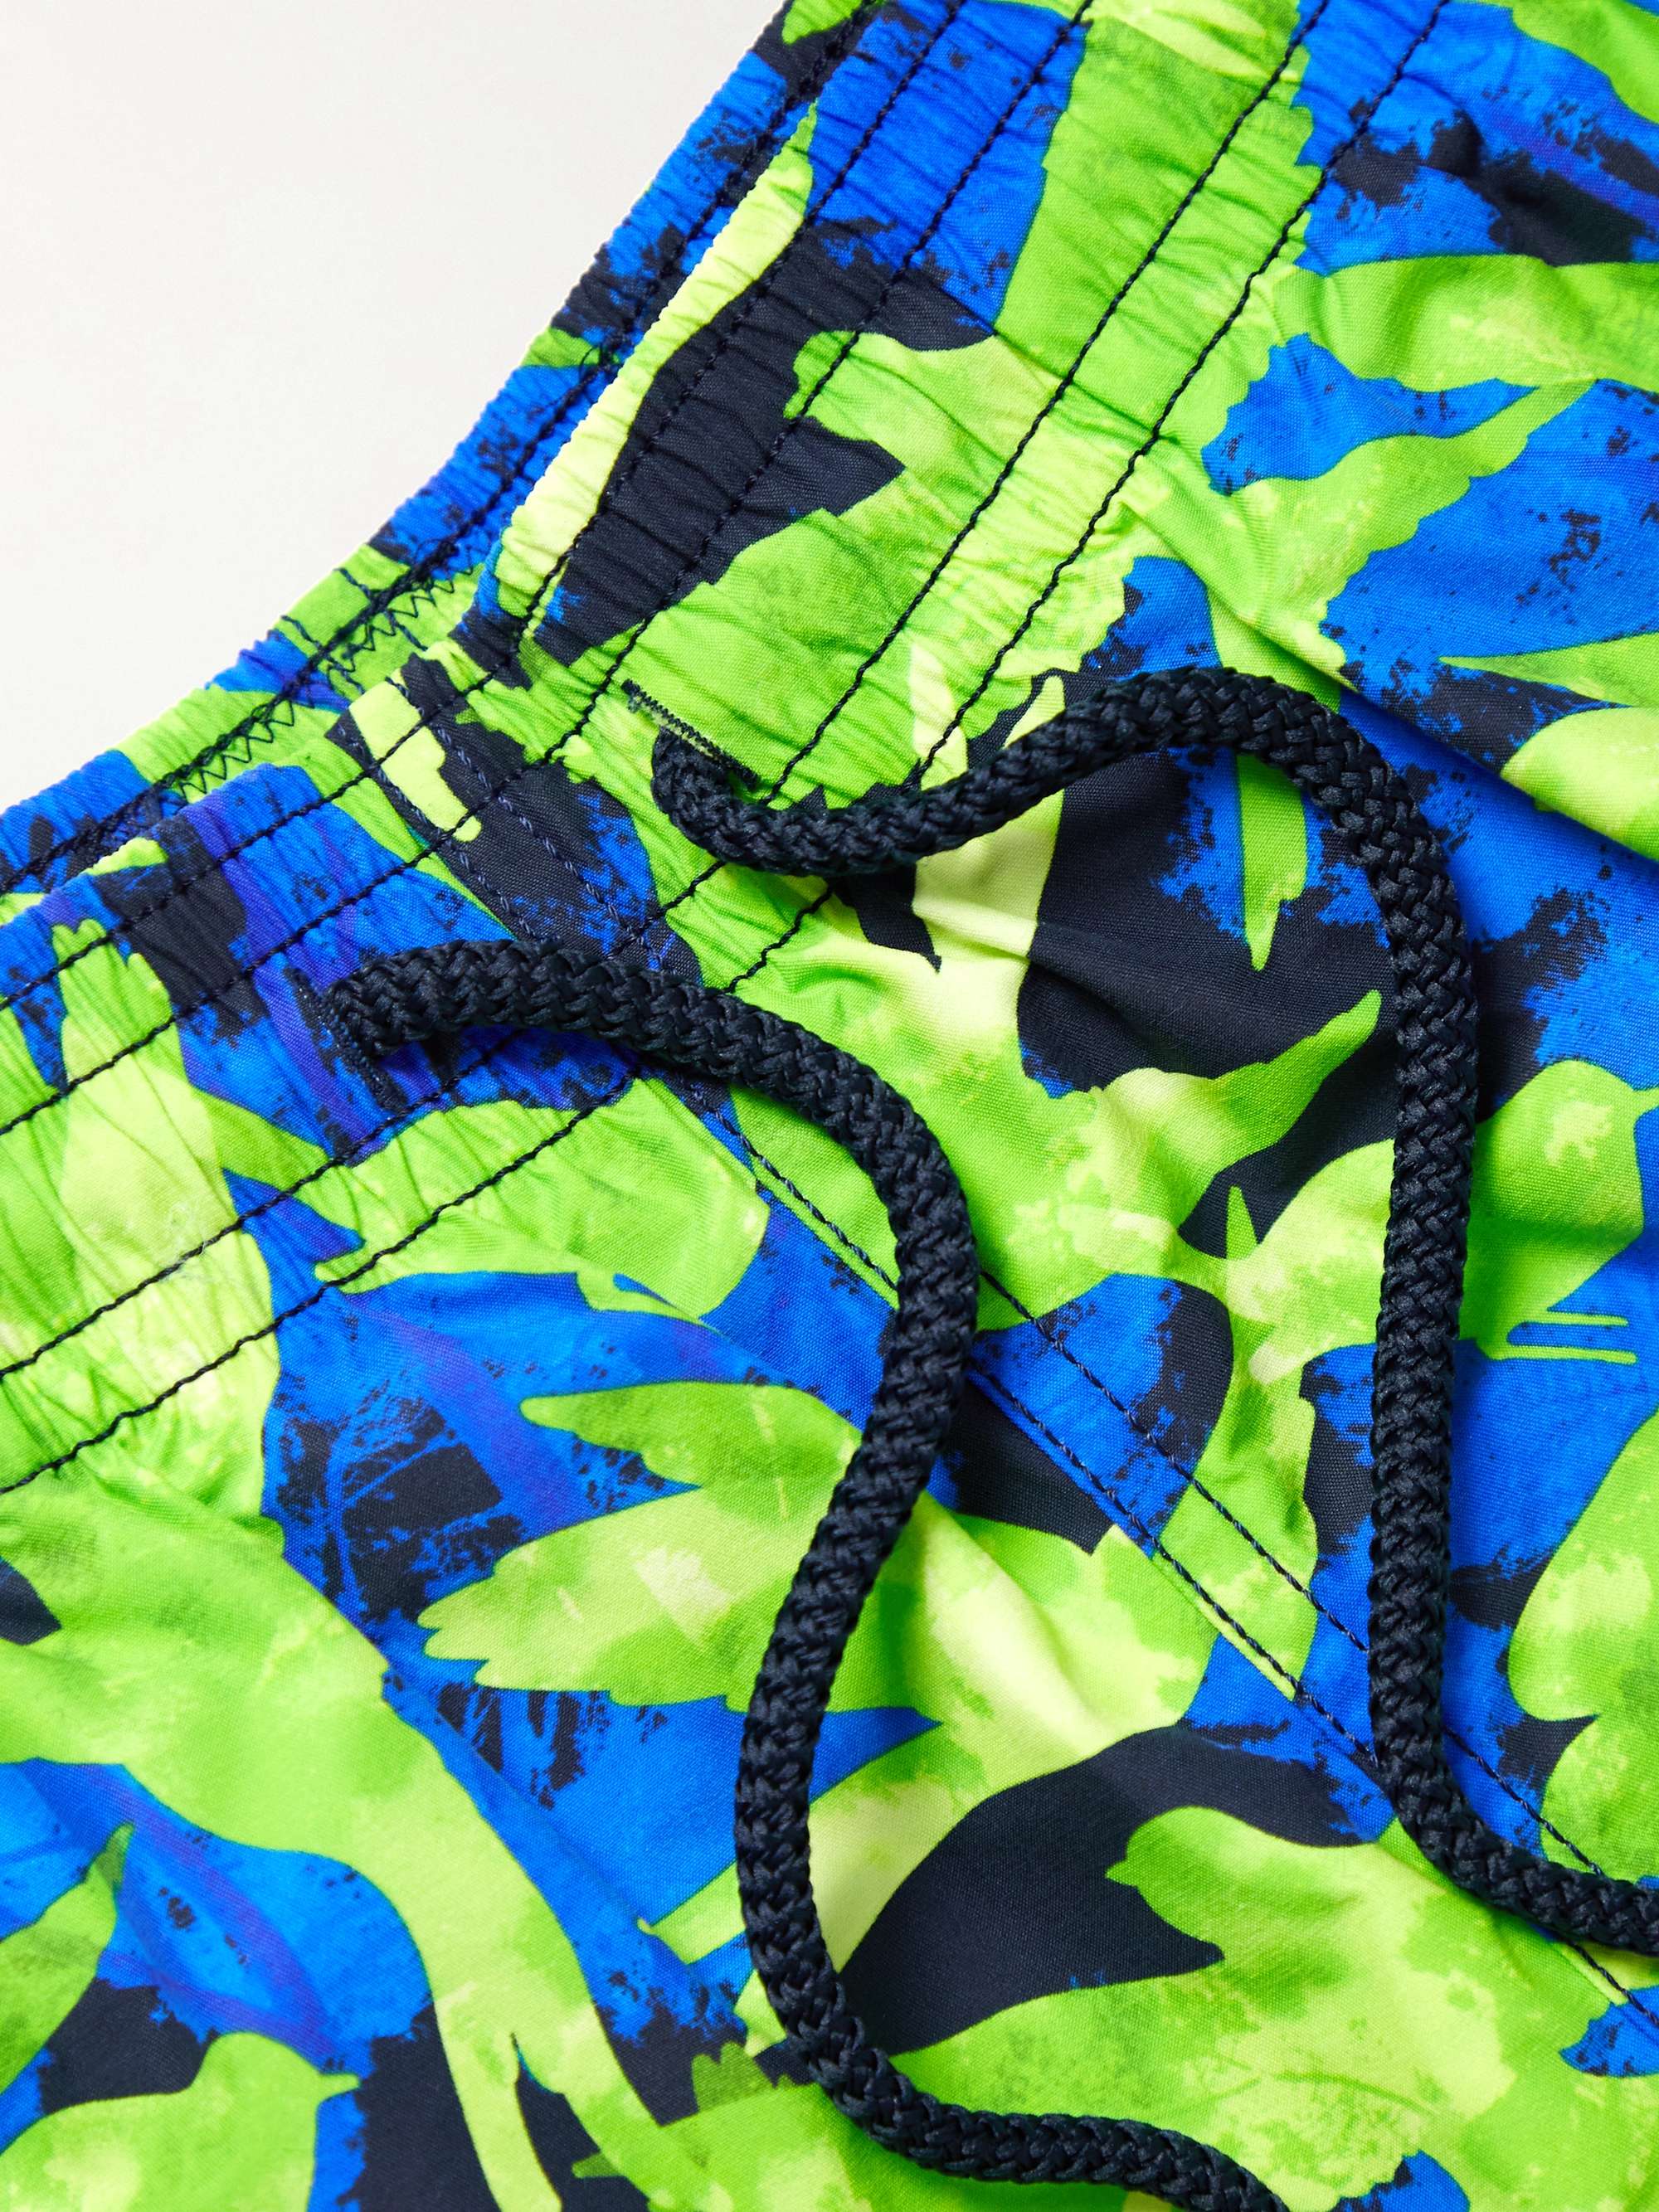 VILEBREQUIN Moorea Printed Mid-Length Recycled Swim Shorts